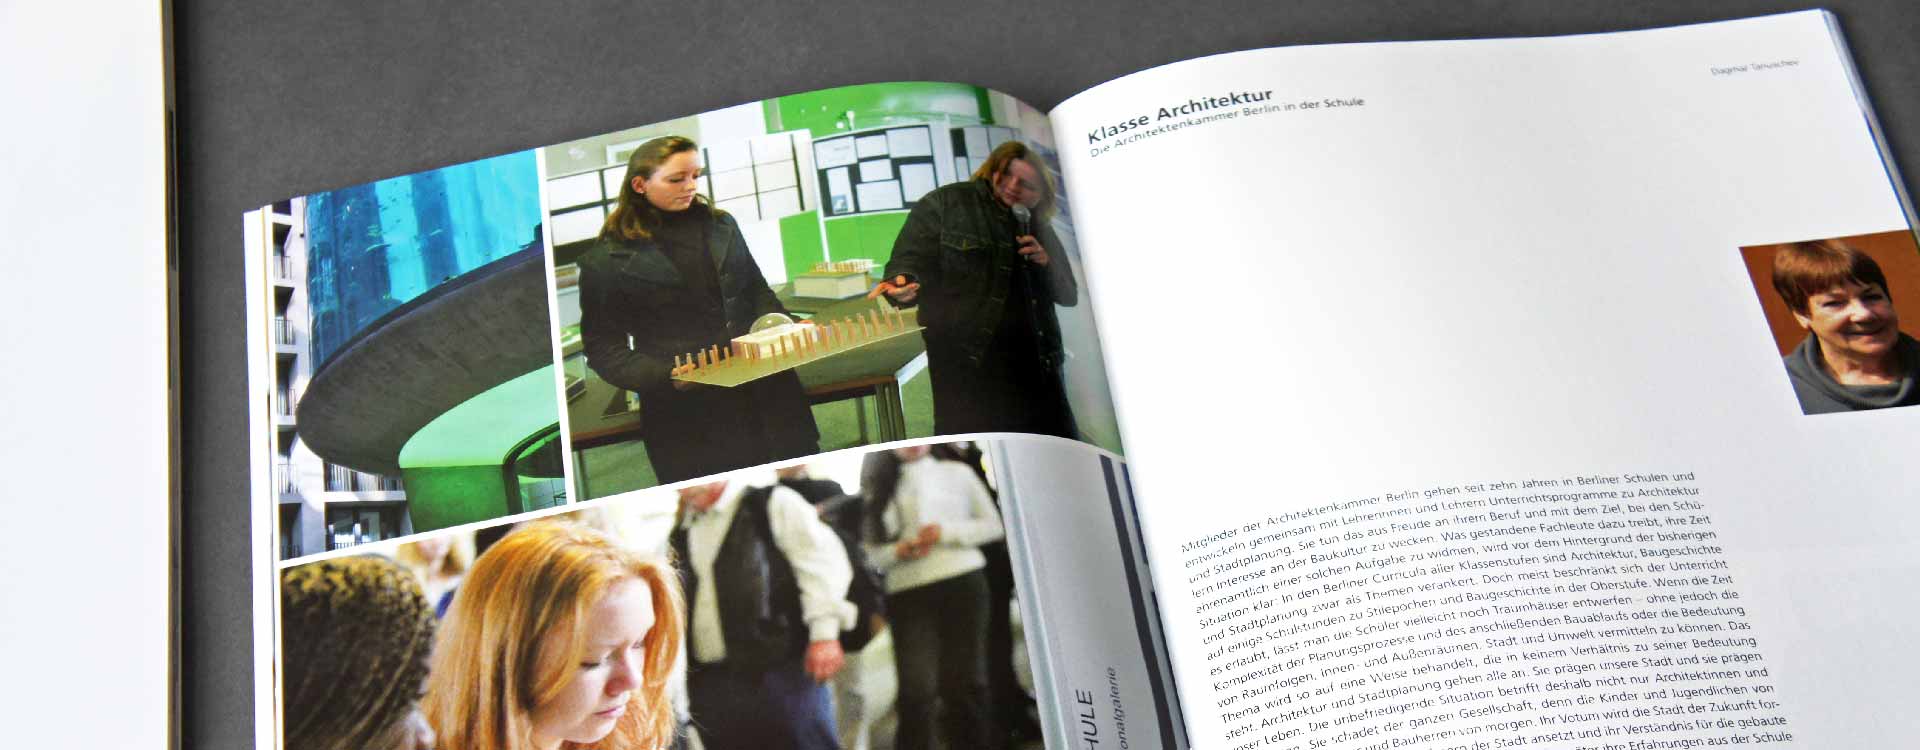 Inside pages of the brochure Architektur und Schule for the Chamber of Architects Berlin; Design: Kattrin Richter | Graphic Design Studio